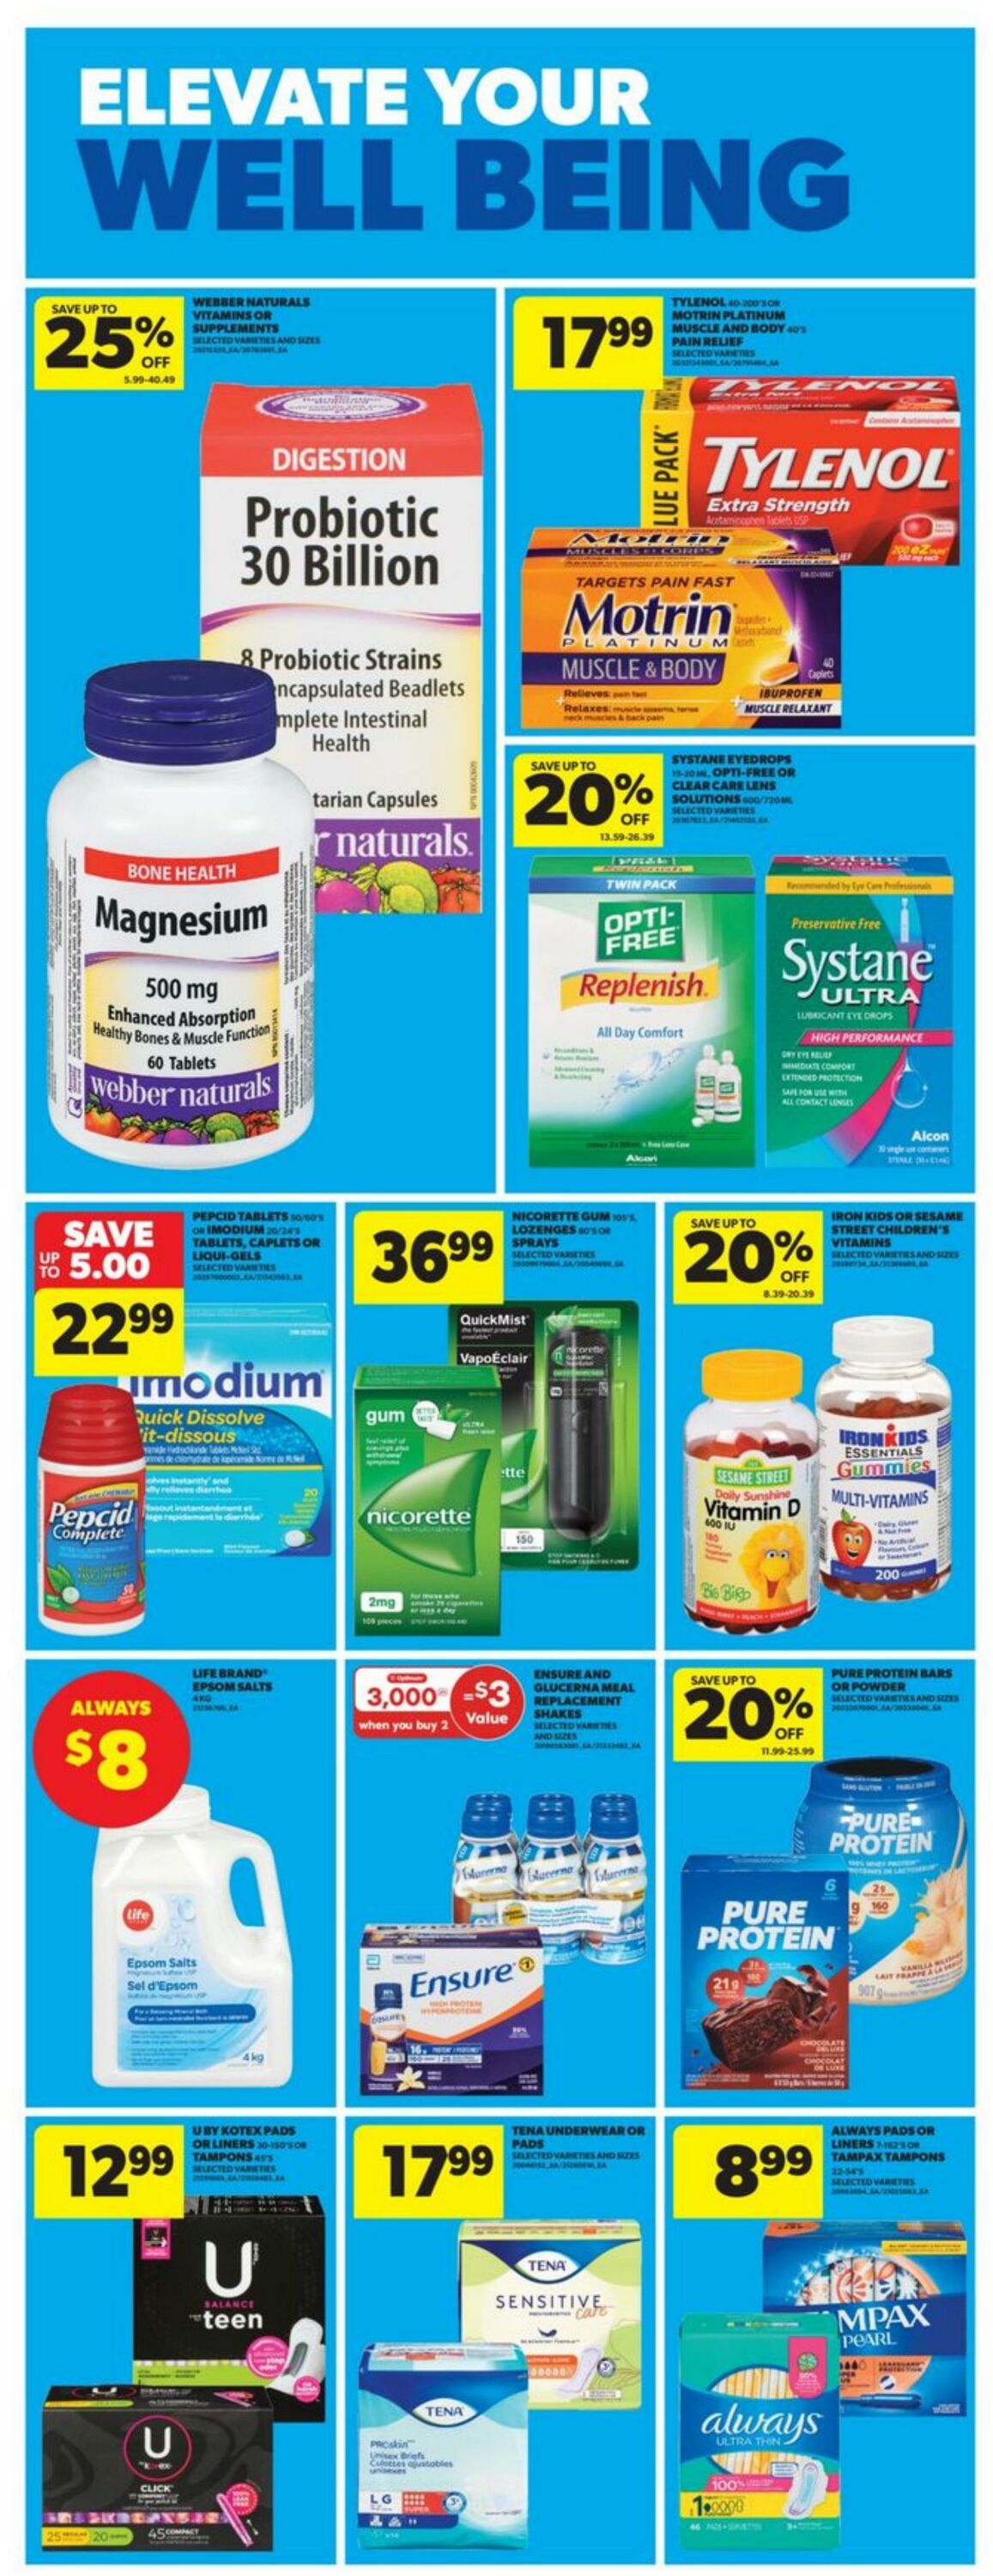 Flyer Real Canadian Superstore 20.06.2024 - 26.06.2024